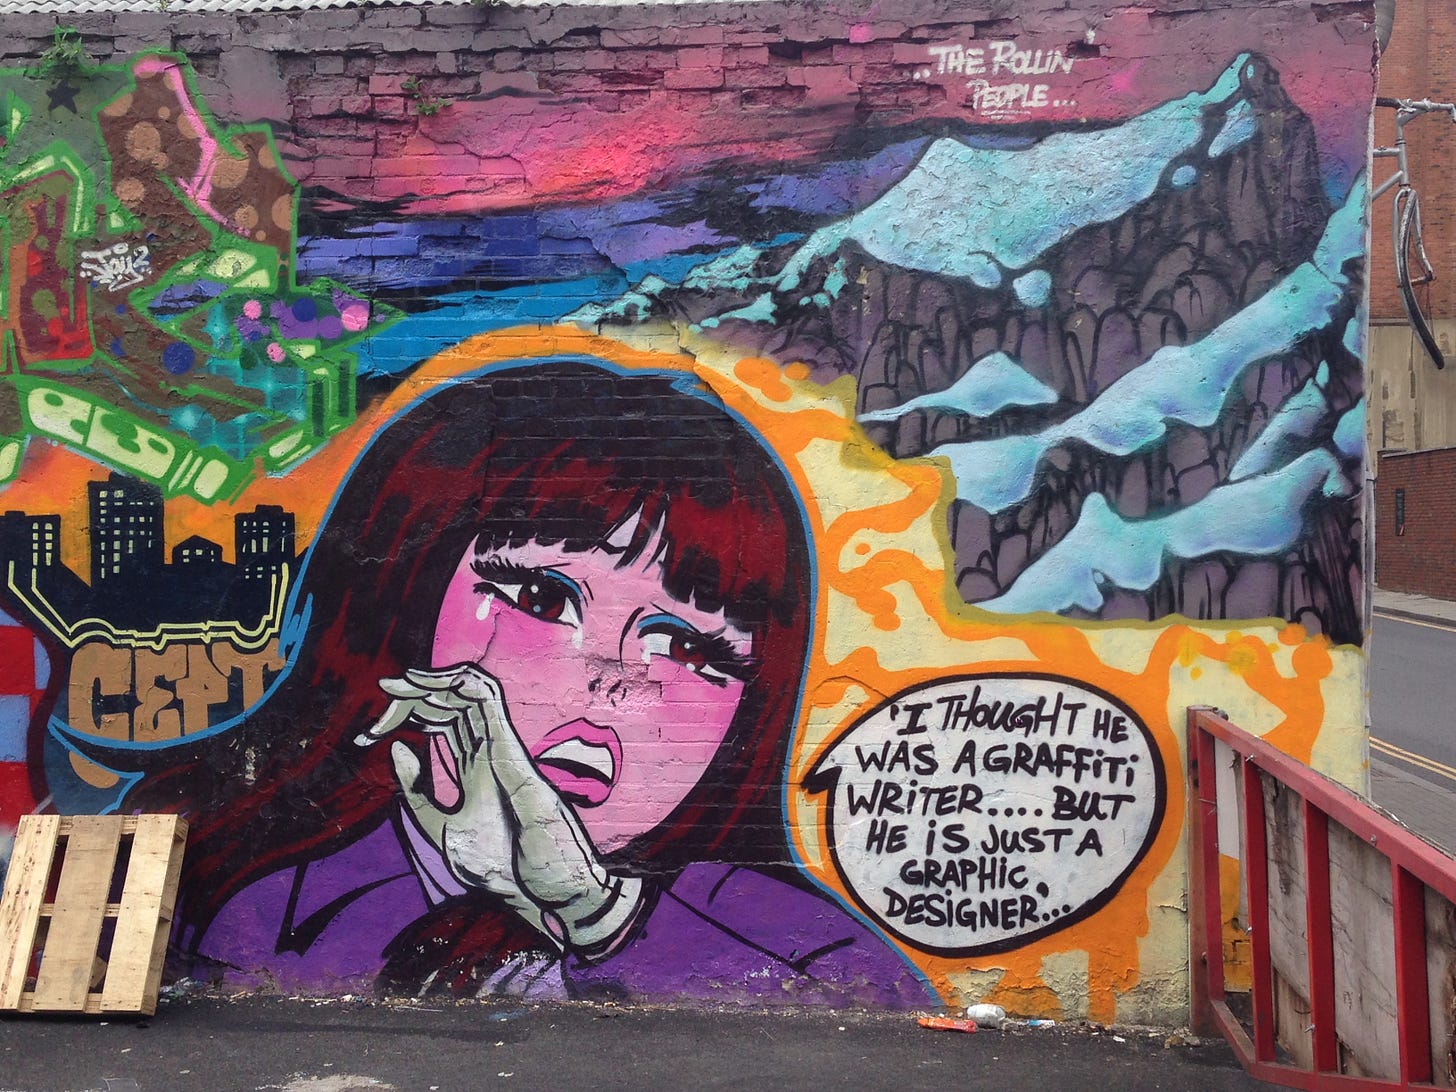 Photo of a wall covered in a graffiti mural showing a cartoon image of a girl with long dark hair and tears in her eyes with a speech bubble that reads 'I thought he was a graffiti writer... but he is just a graphic designer' art by Cept, photo taken by Sarah Farley